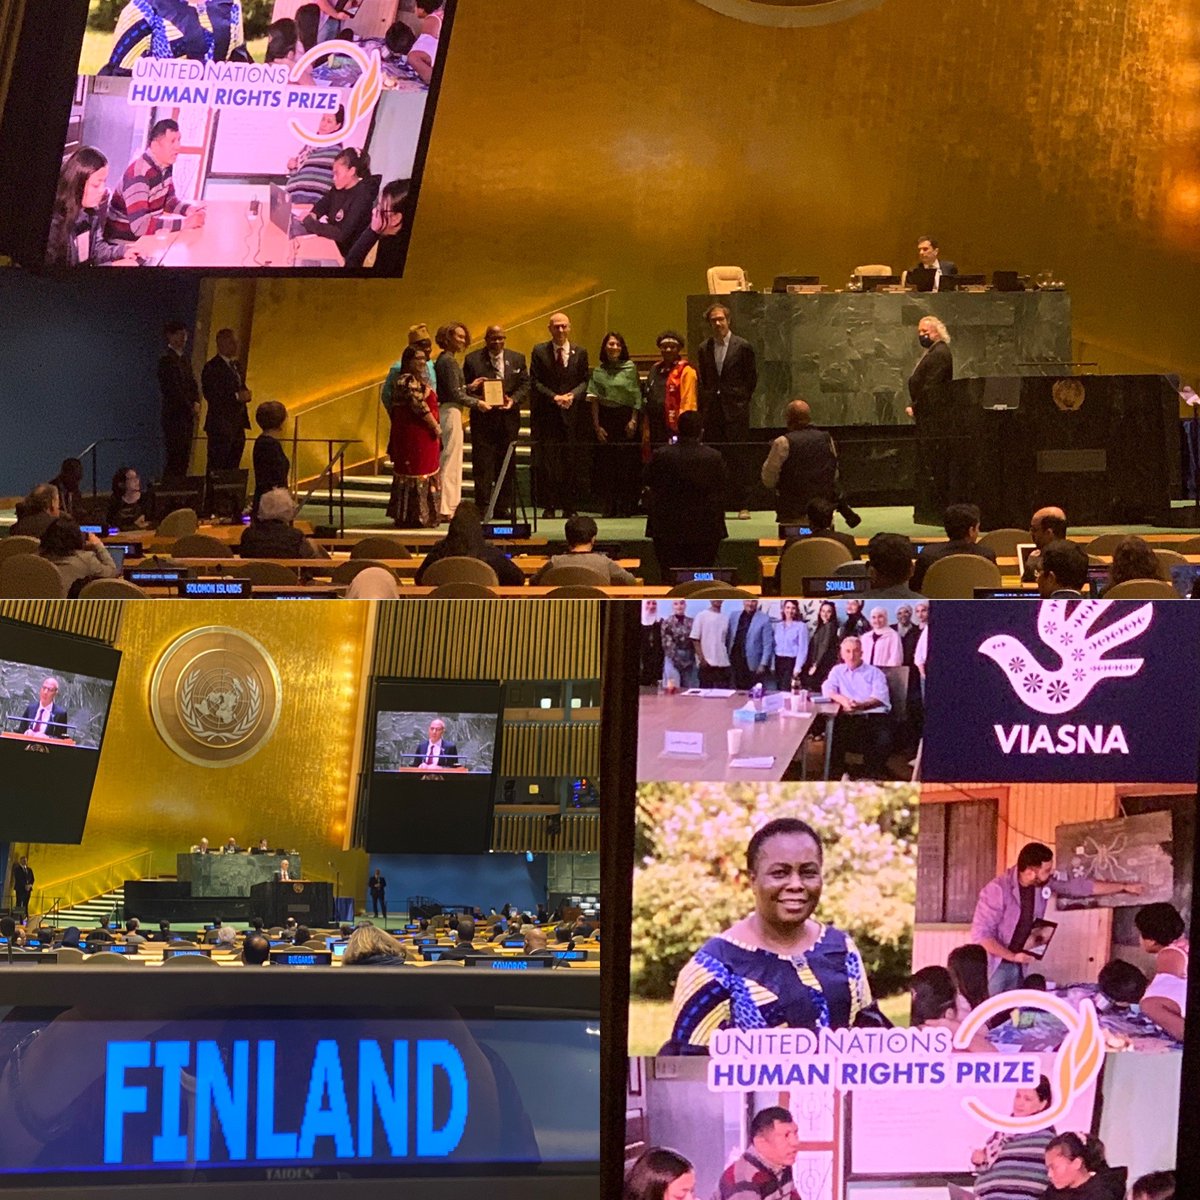 Congrats to the winners of 2023 #UN #HumanRights Prize & enormous thanks for your work! Fascinated to learn about the history of the #UDHR Article 1 and how the only female delegates, Hansa Mehta (India) and Eleanor Roosevelt (US), changed “all men” to “all human beings”.